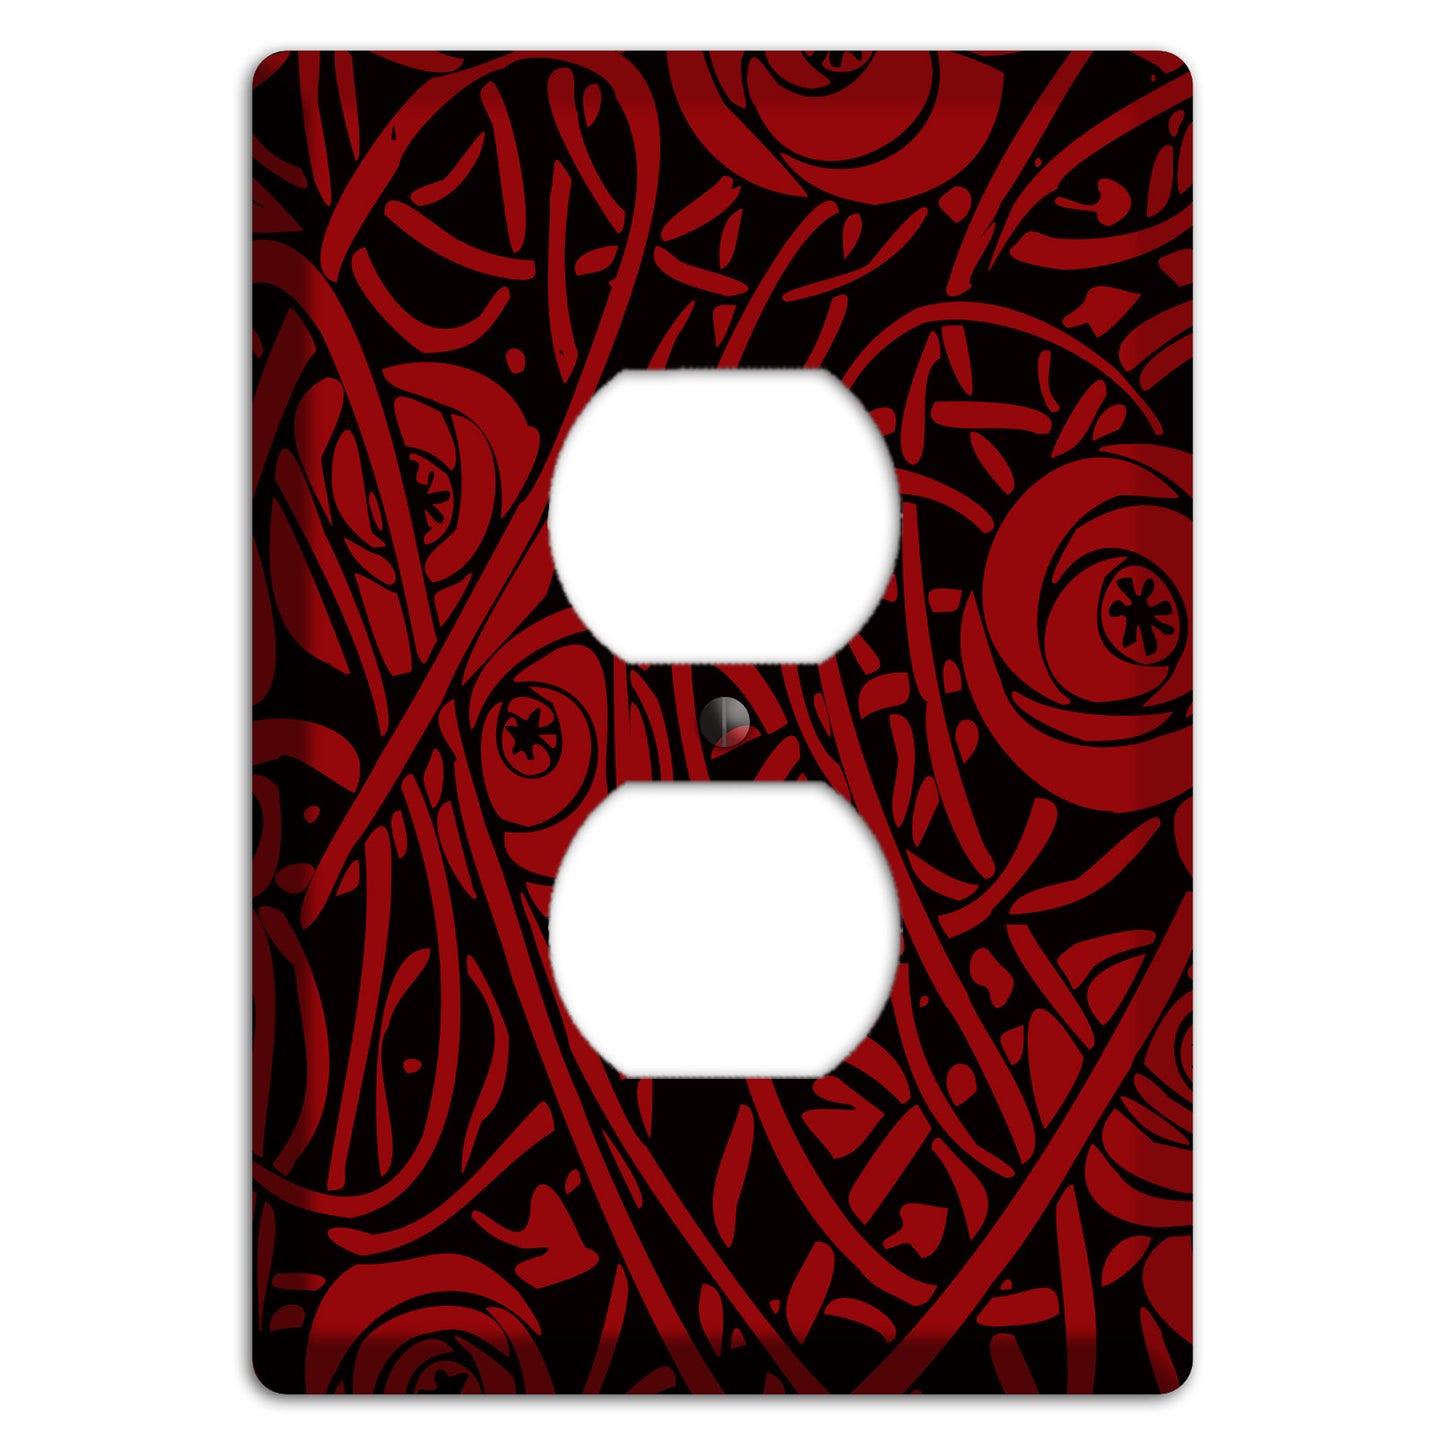 Red Deco Floral Duplex Outlet Wallplate